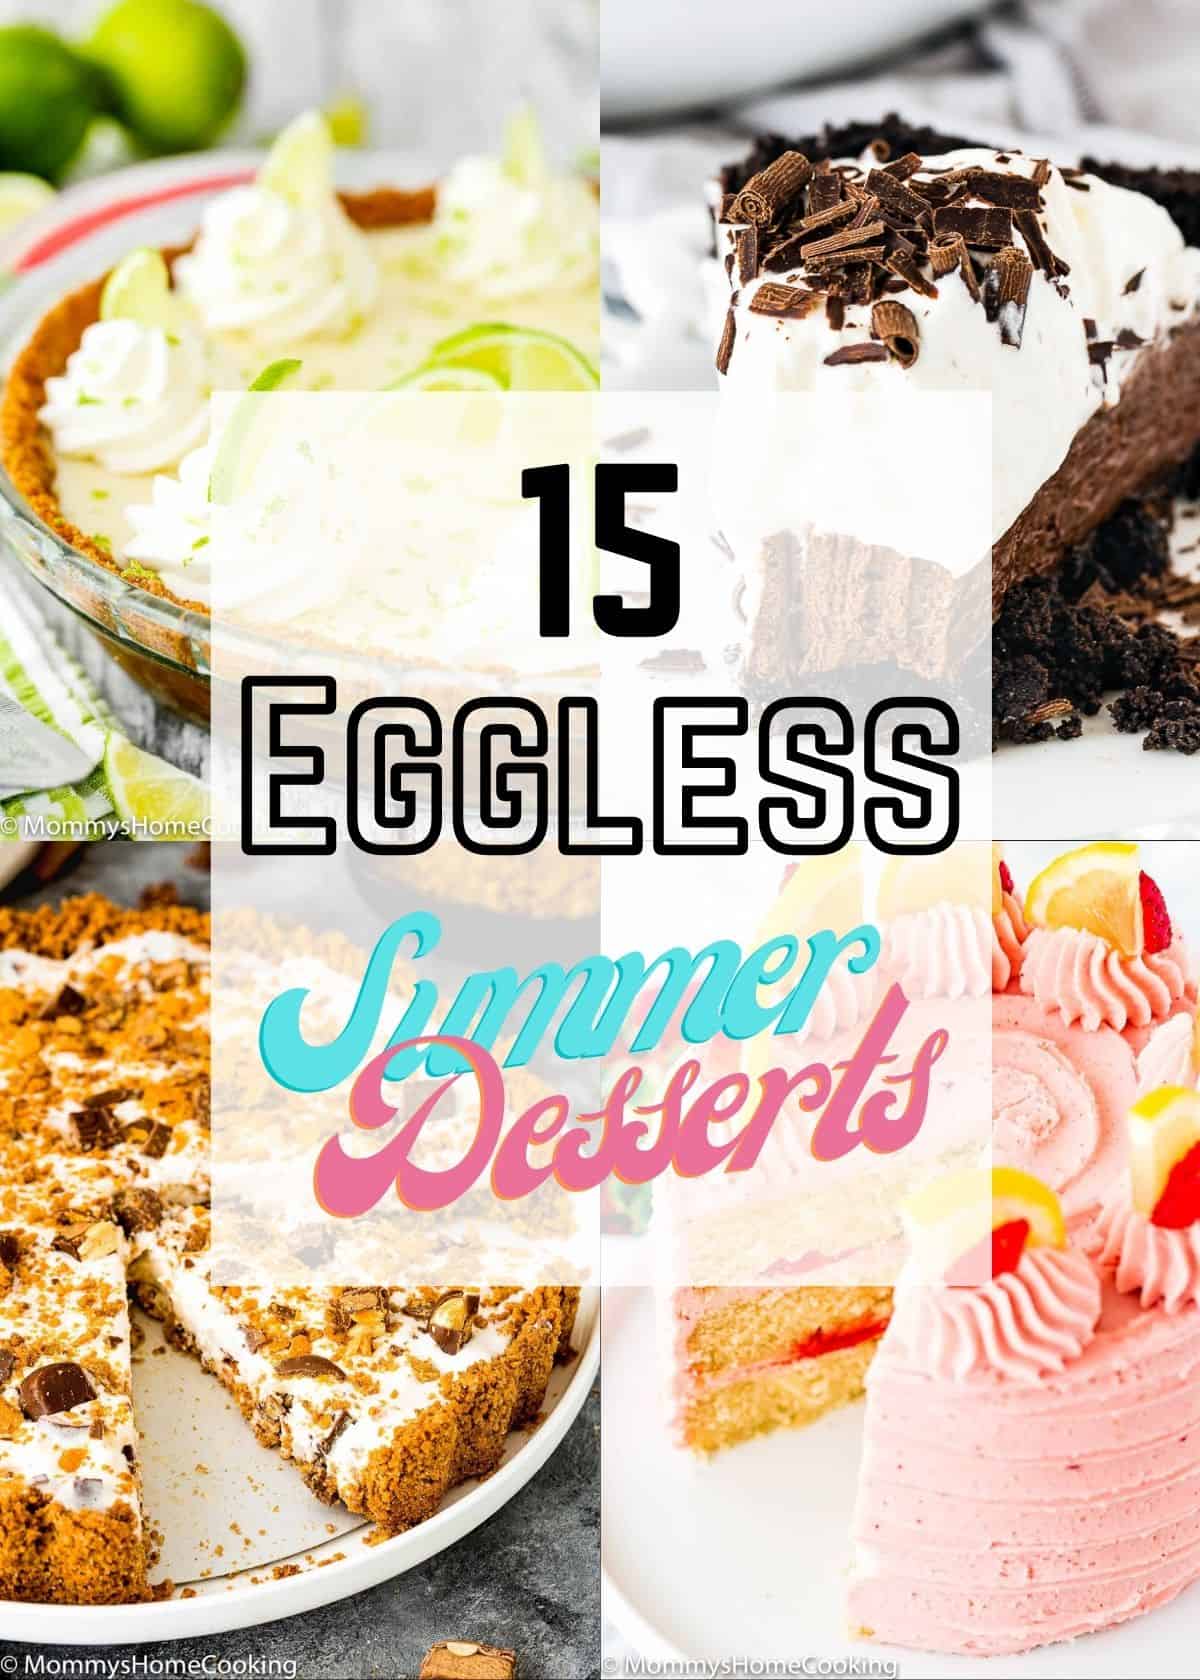 4 egg free desserts for summer with descriptive text